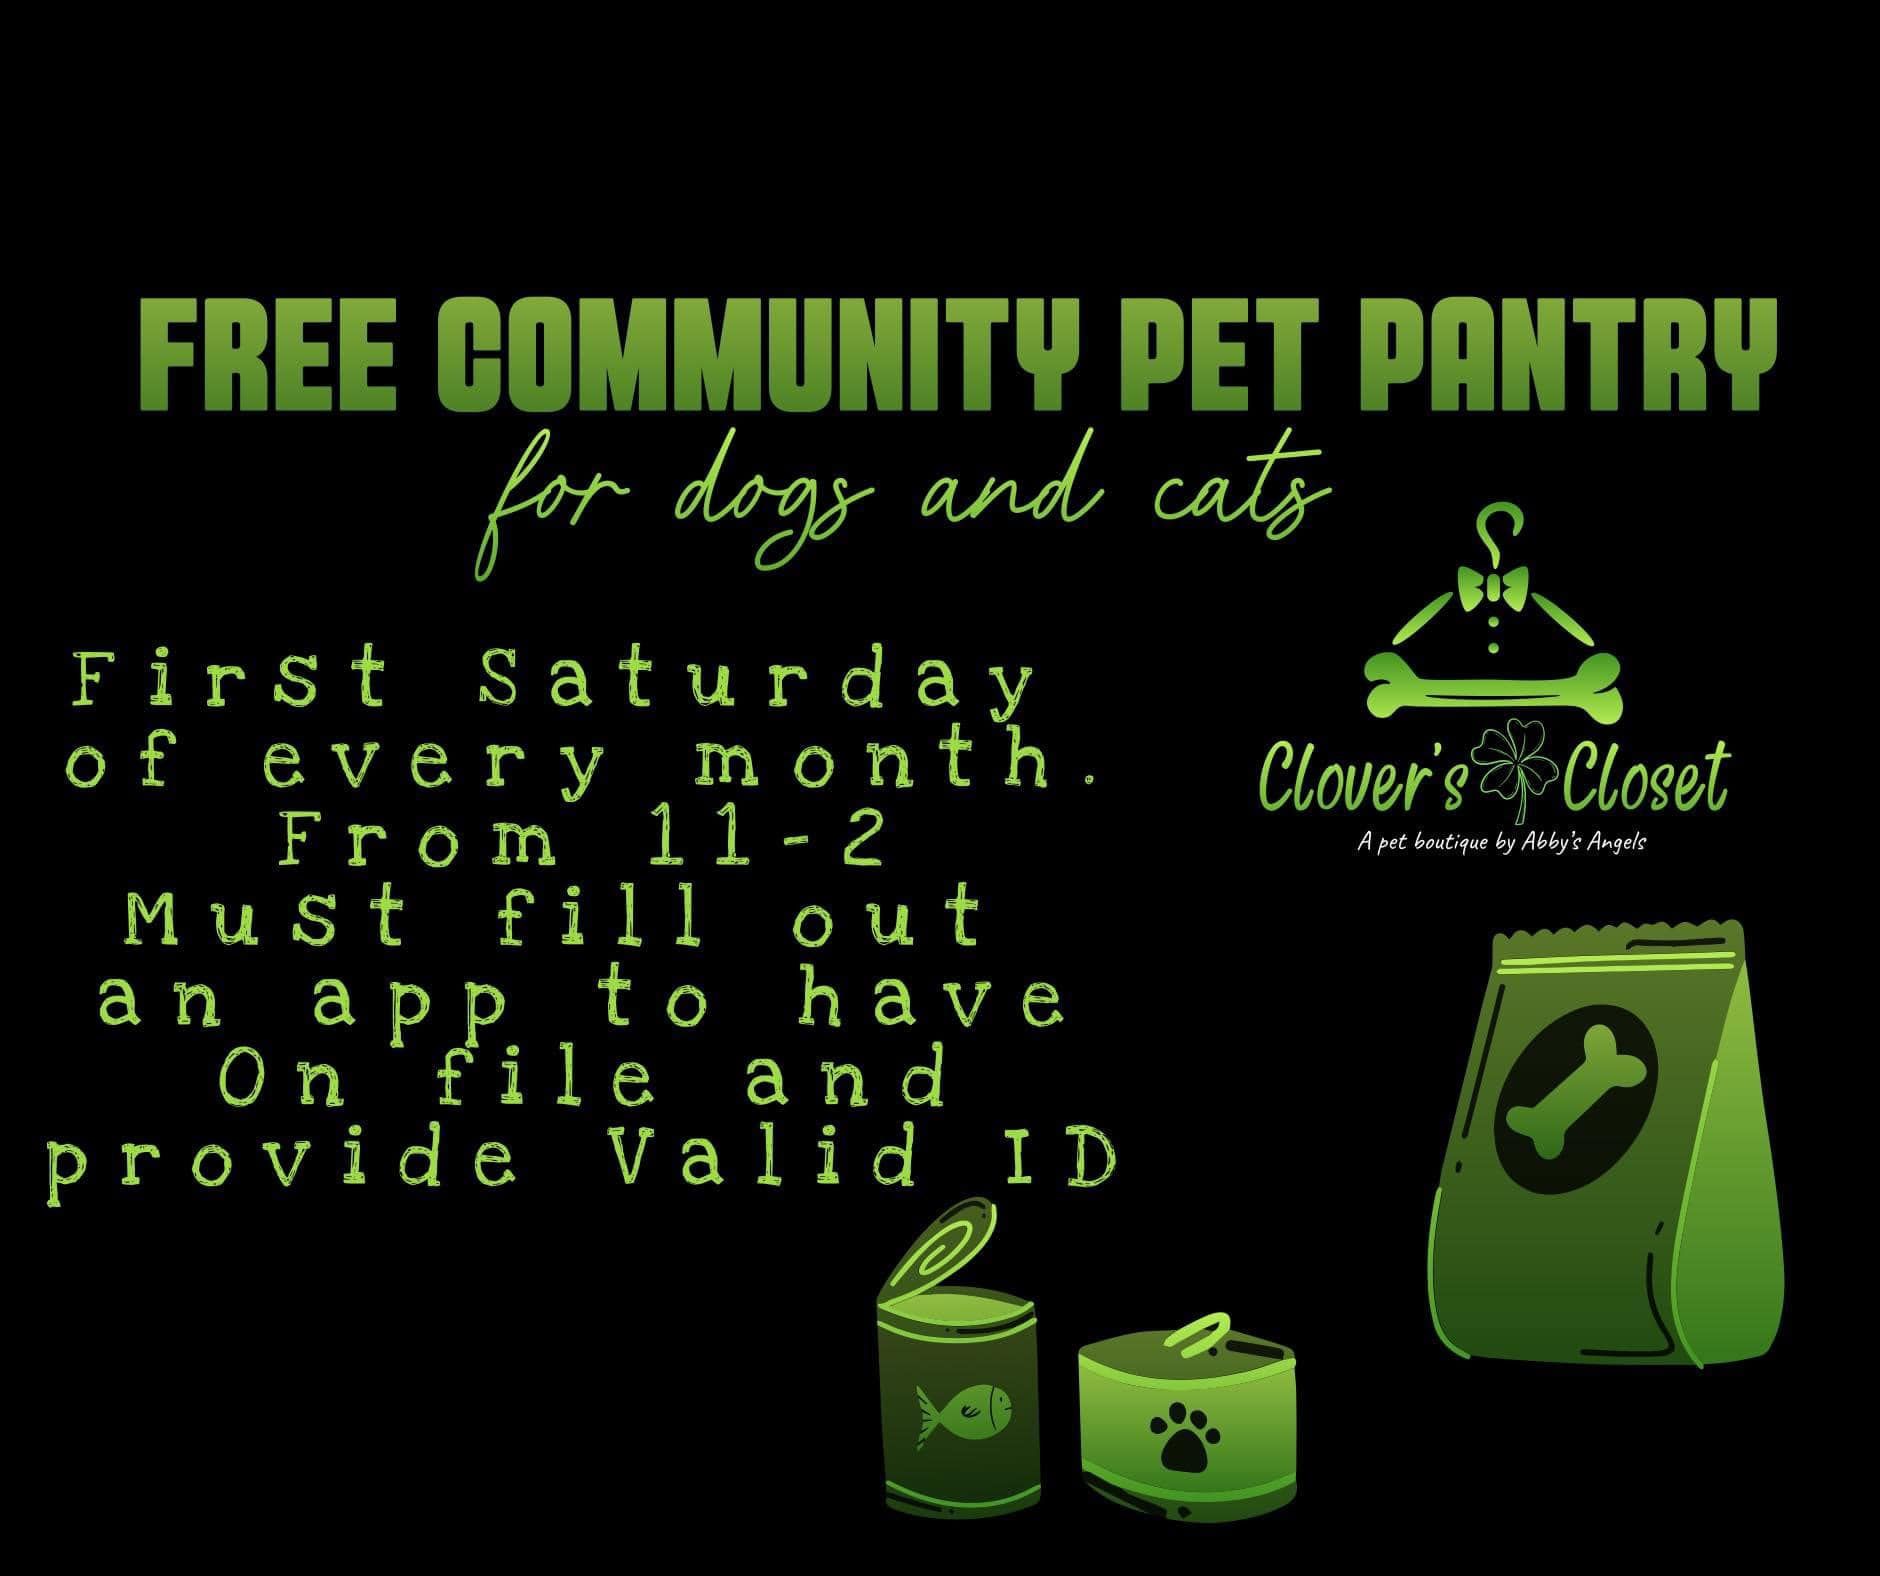 Free community pet pantry for dogs and cats